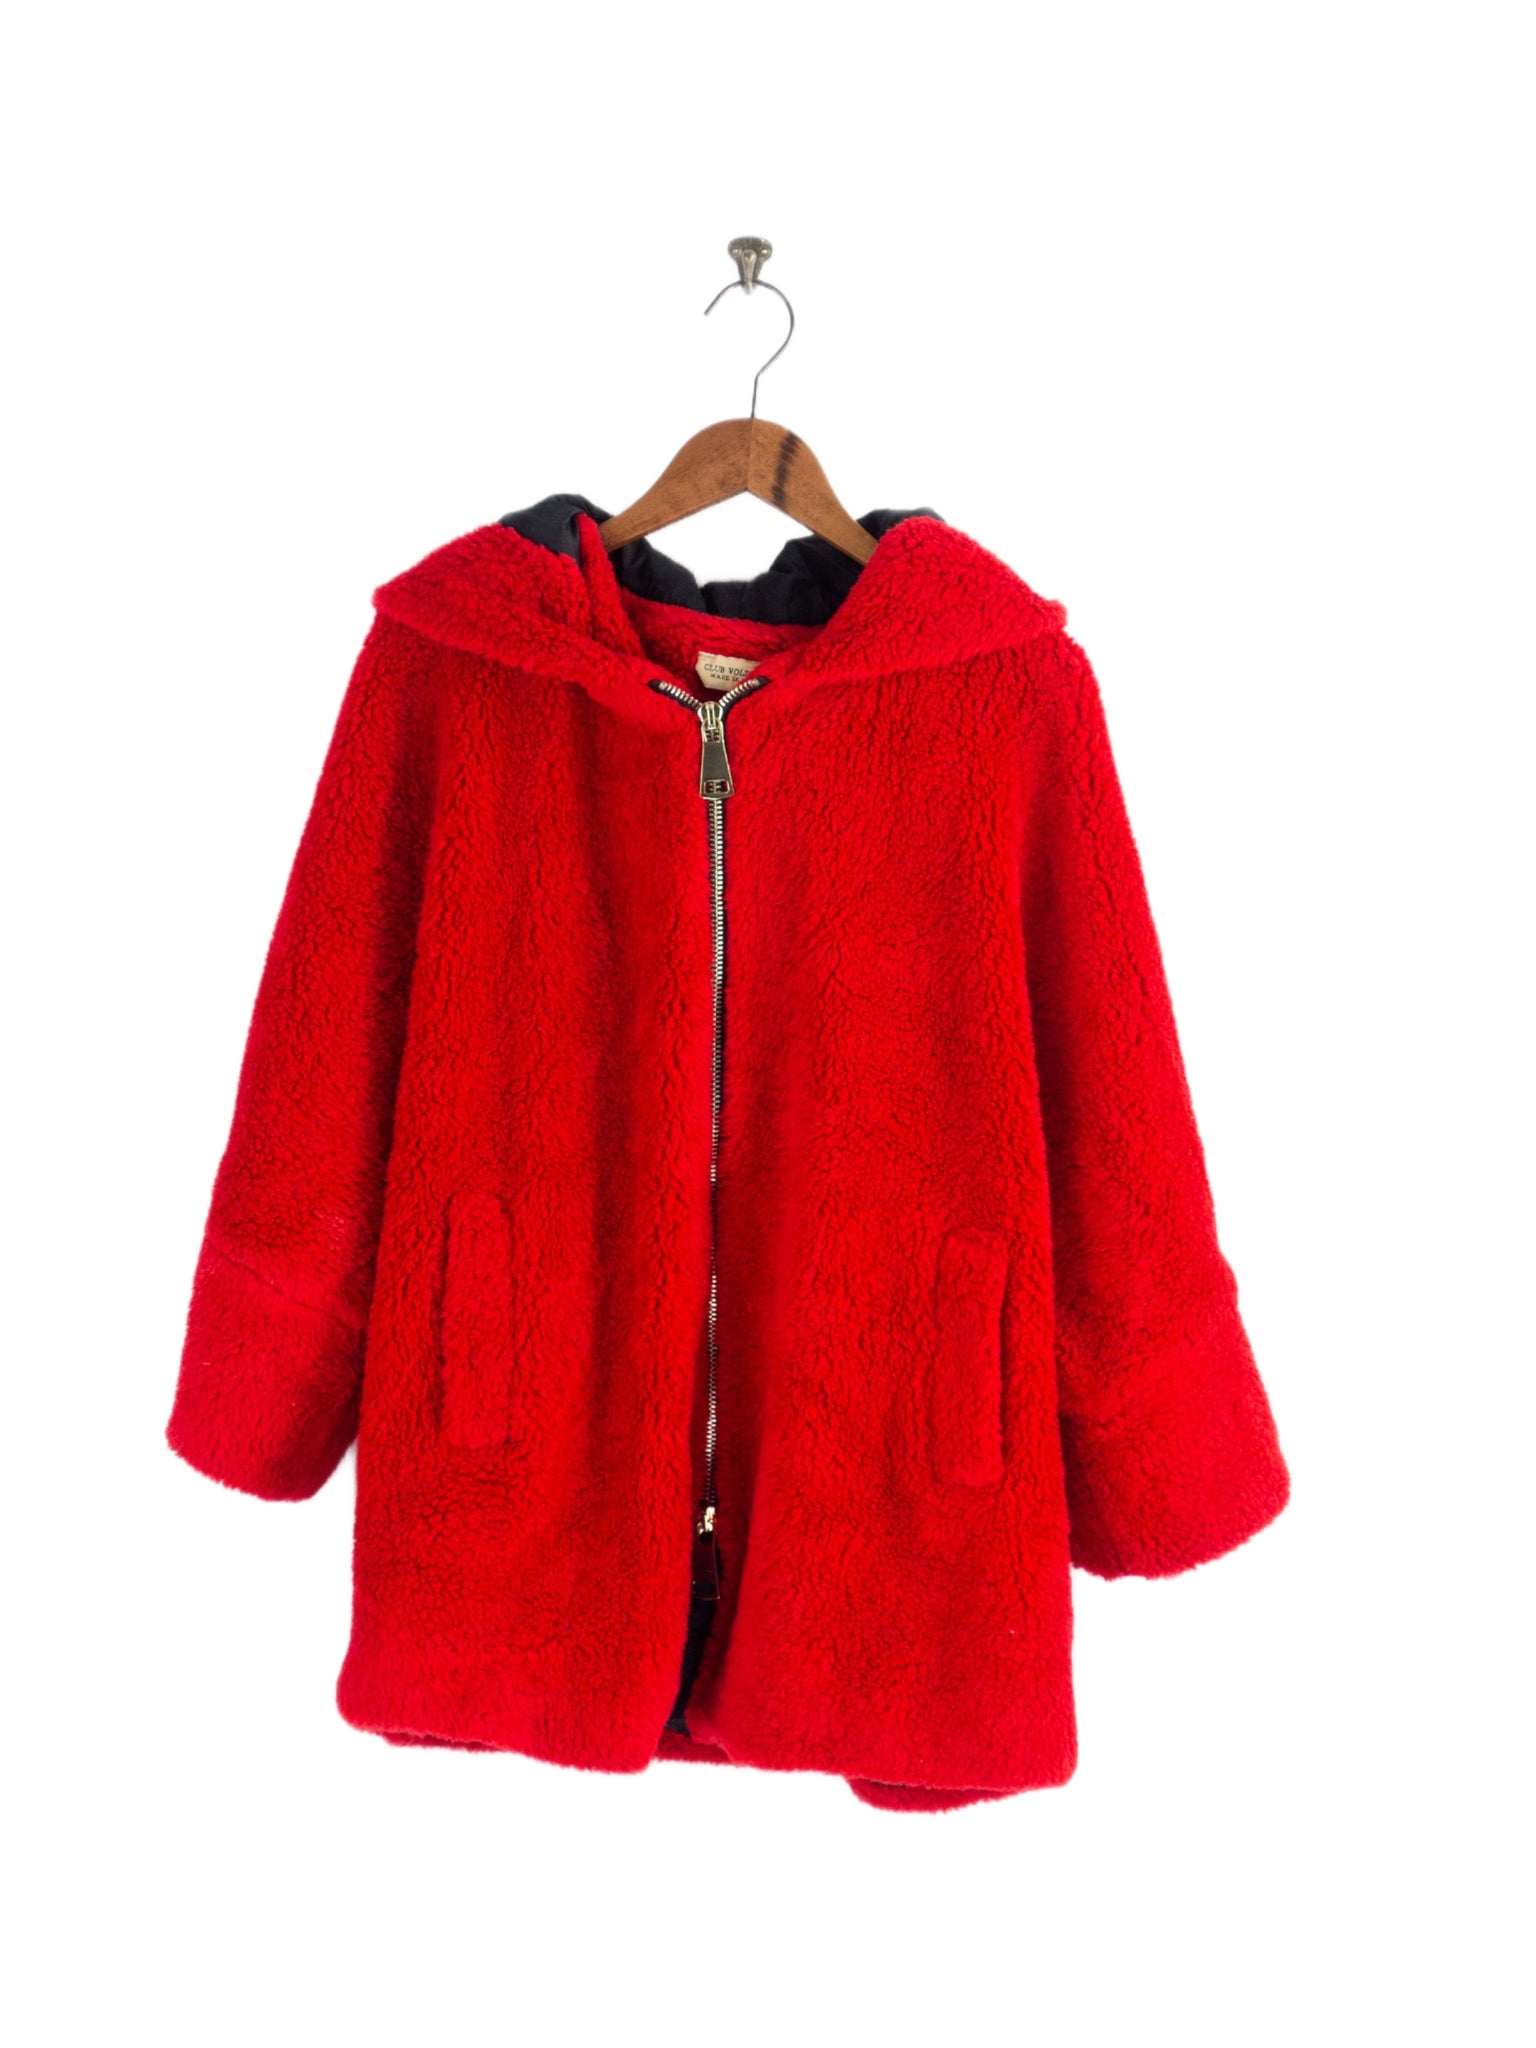 Rote Club Voltaire Jacke XL